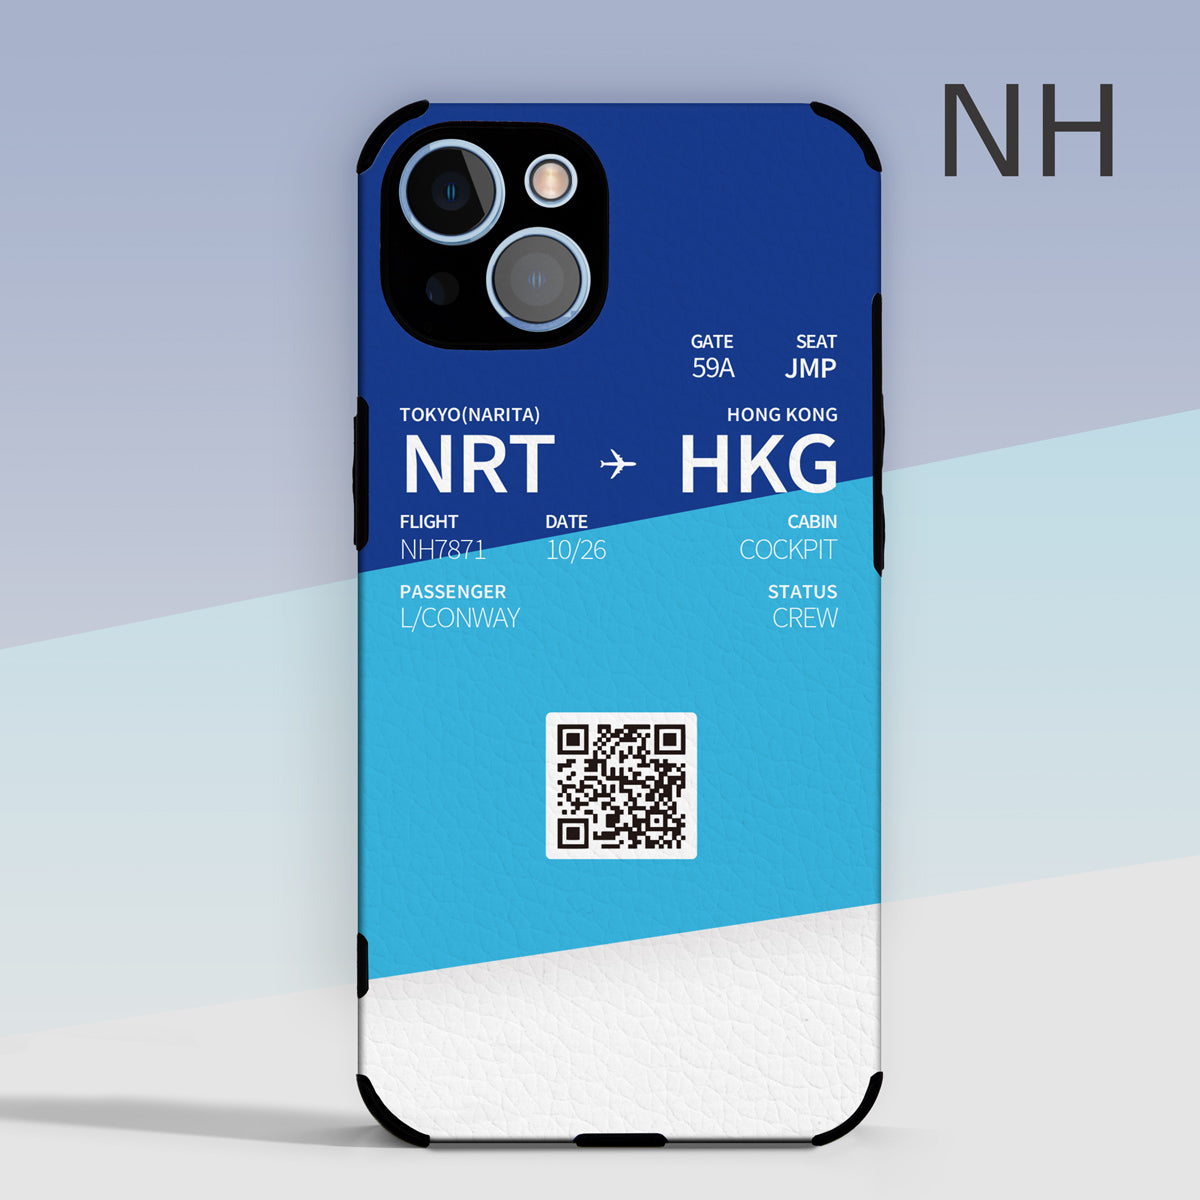 ANA All Nippon Airways NH color Boarding Pass Phone Case design perfect for aviation geeks crew pilot apple iphone huawei samsung xiaomi